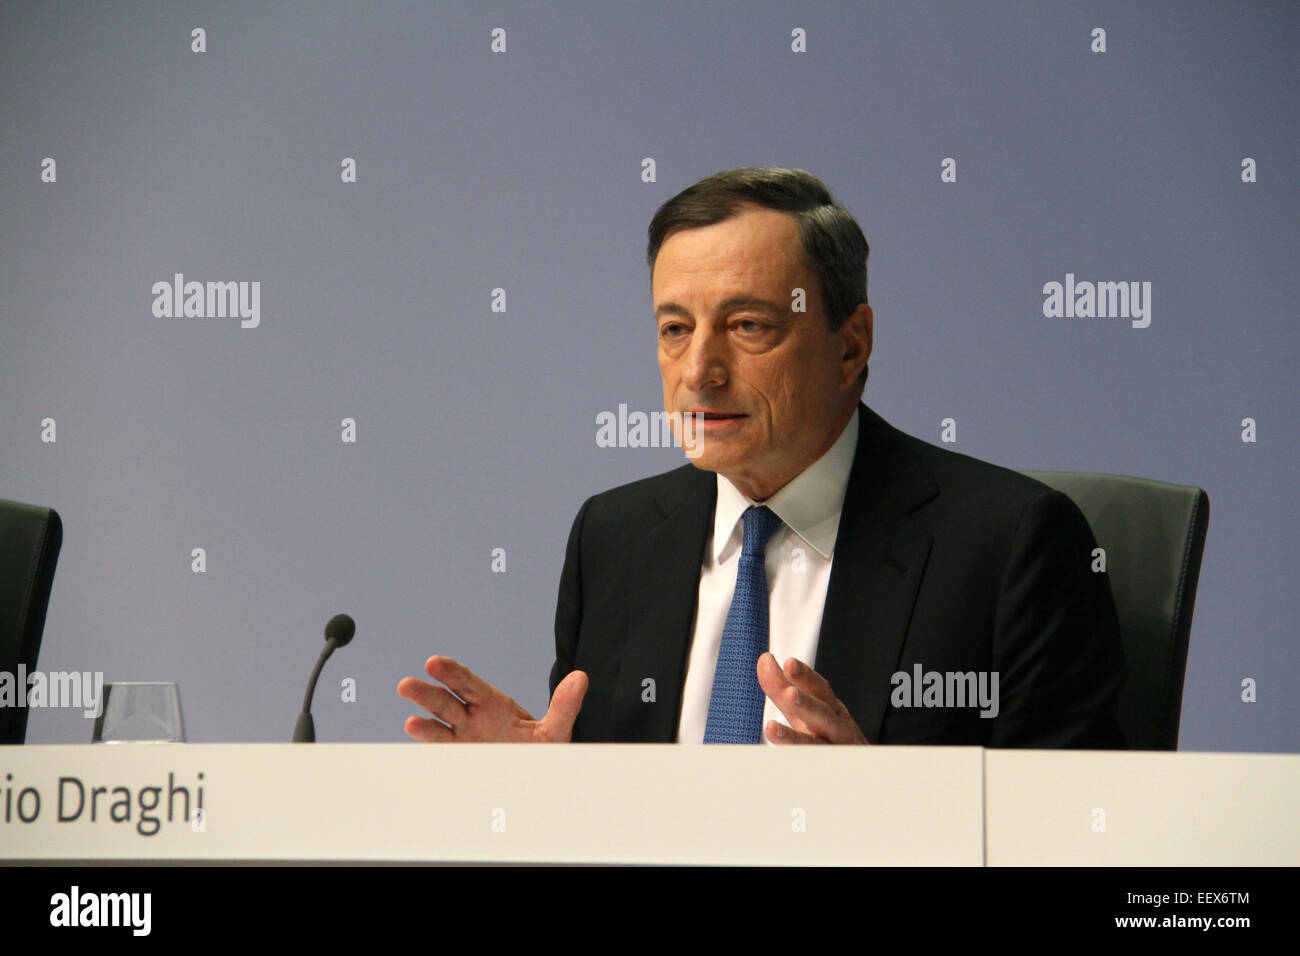 Frankfurt, Germany. 22nd Jan, 2015. European Central Bank President Mario Draghi attends a press conference in Frankfurt, Germany, on Jan. 22, 2015. The European Central Bank decided on Thursday to start a large scale quantitative easing program and pump over one trillion euros into the euro zone economy in a bid to address risks of deflation. Credit:  Shen Zhengning/Xinhua/Alamy Live News Stock Photo